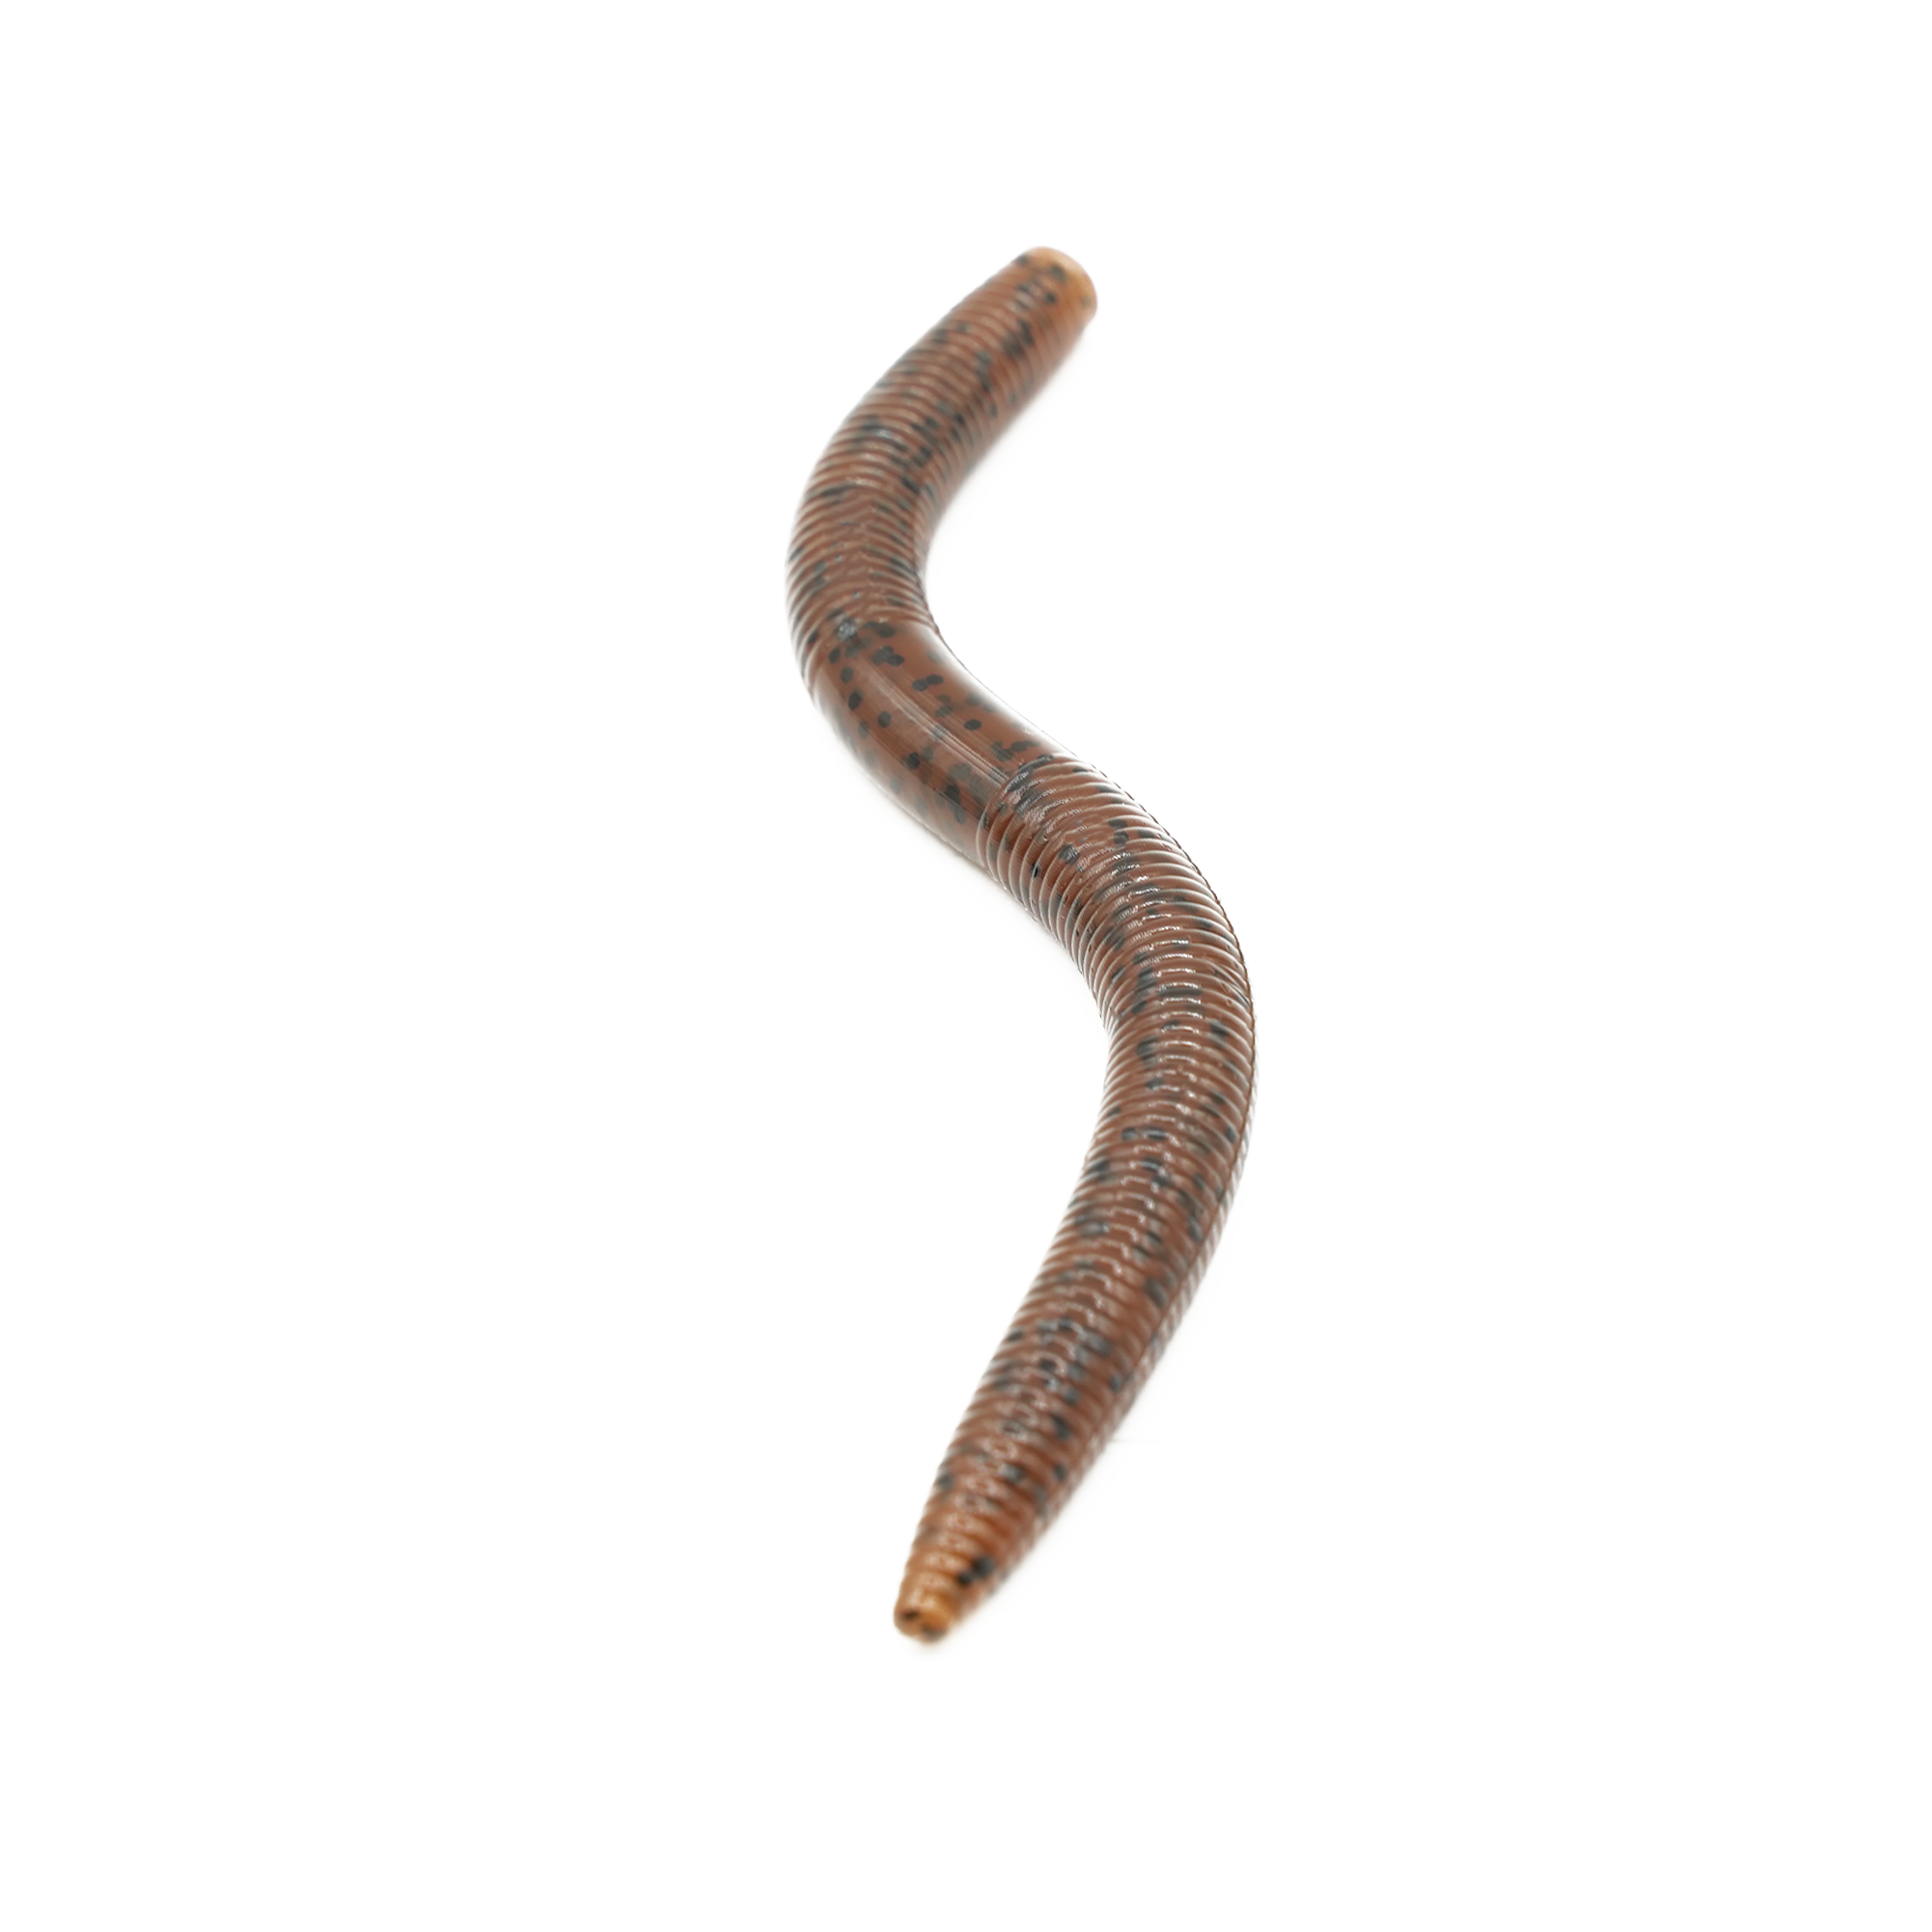 Worm - Brown